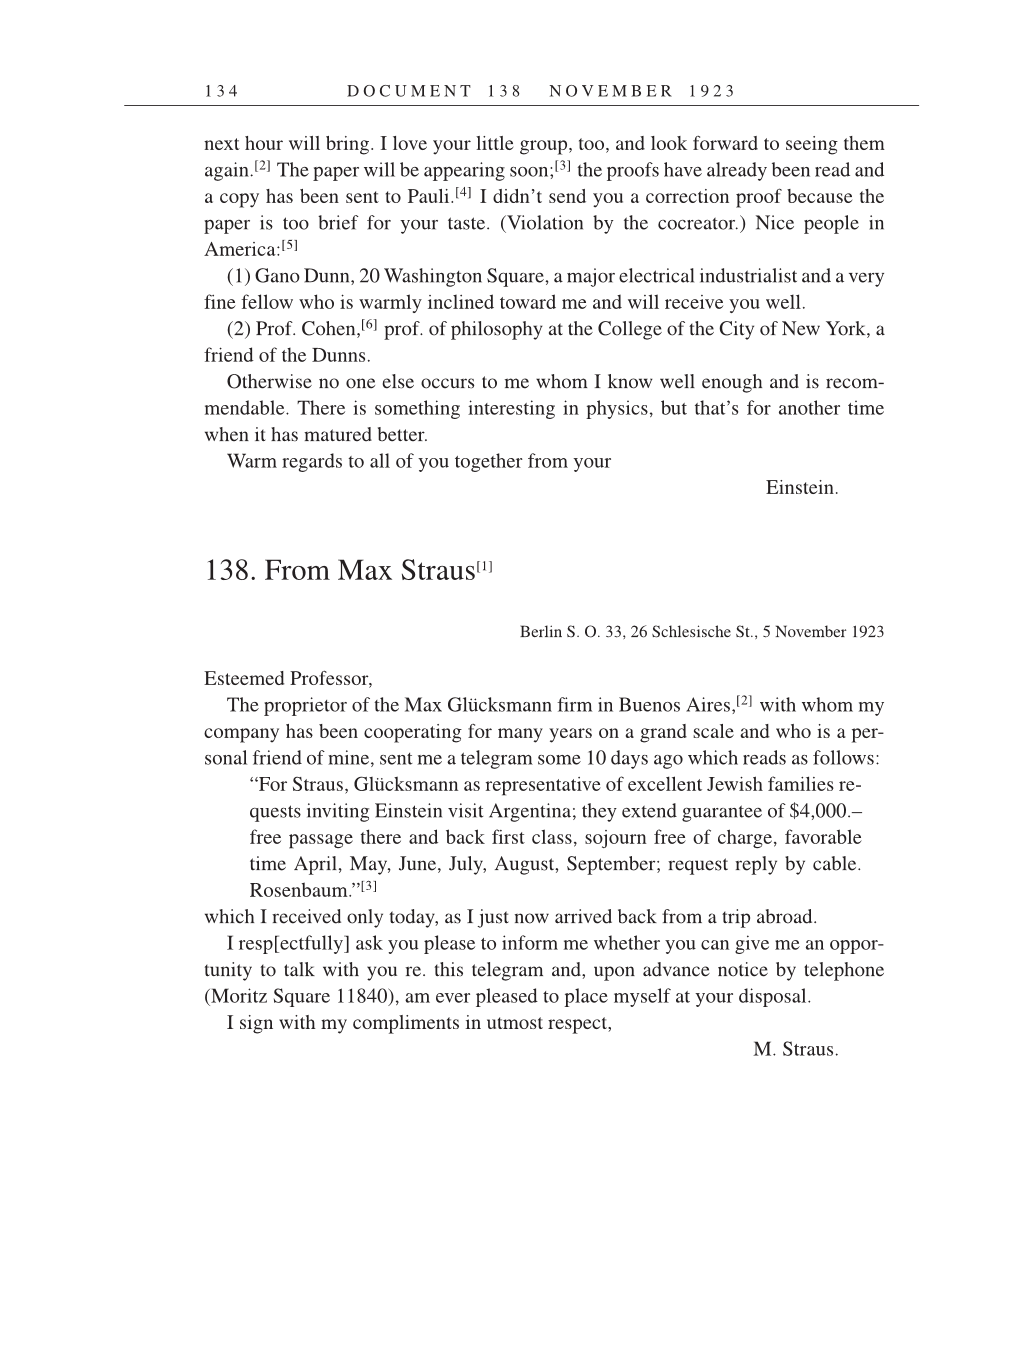 Volume 14: The Berlin Years: Writings & Correspondence, April 1923-May 1925 (English Translation Supplement) page 134